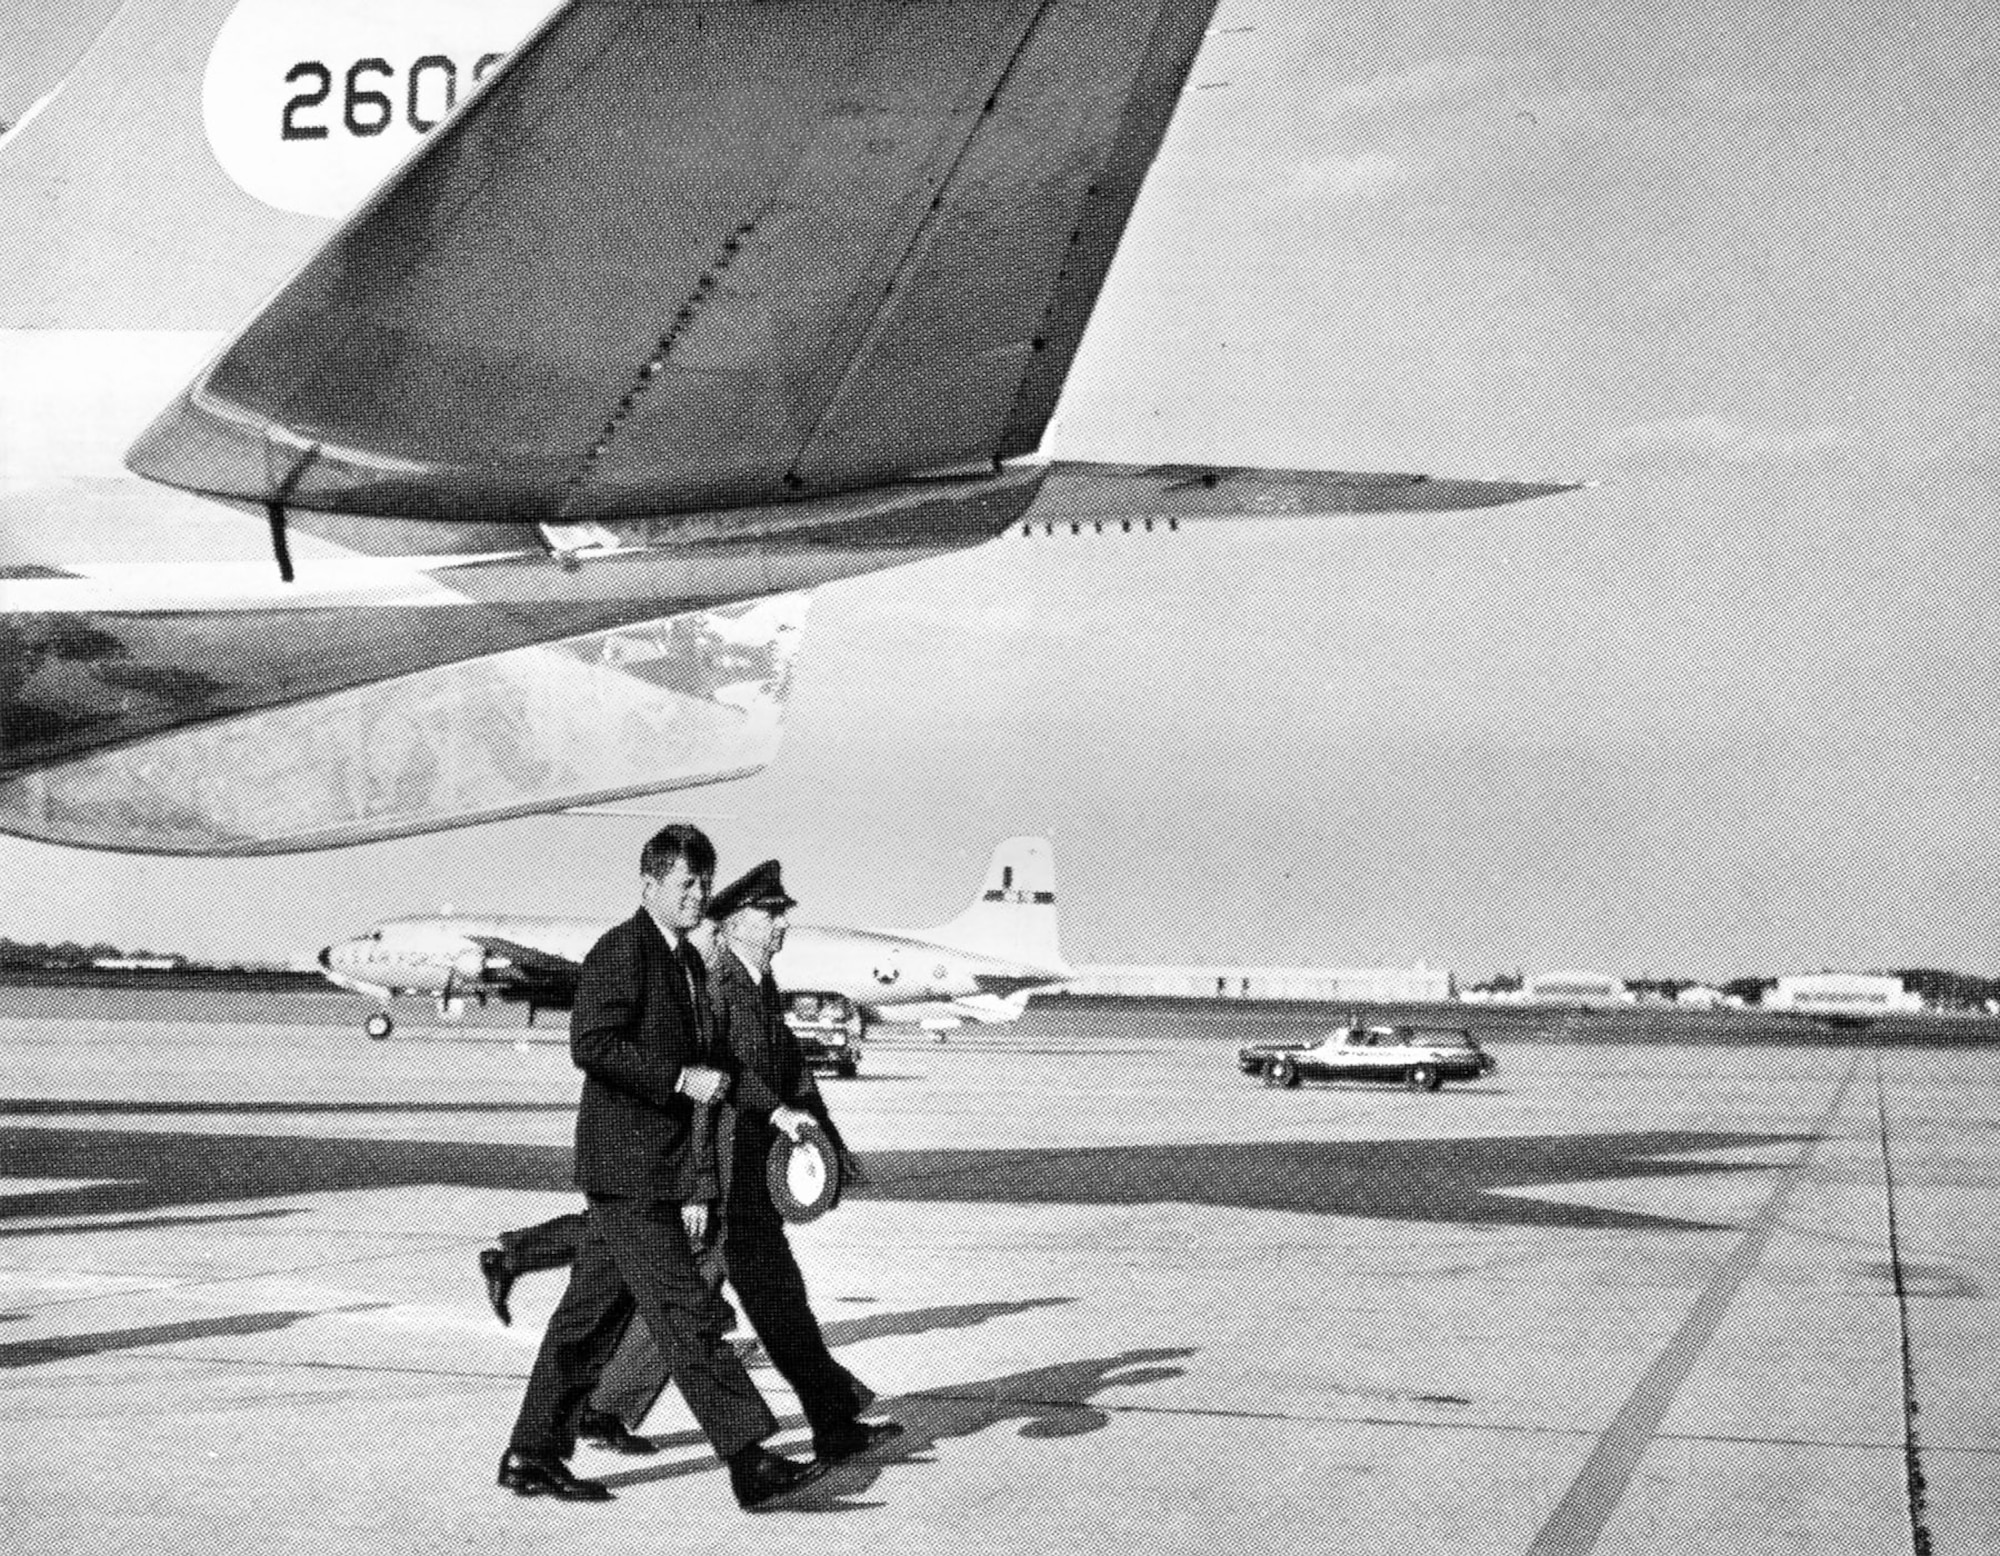 President John F. Kennedy walks with a base commander under the tail of Boeing VC-137C SAM 26000 (Air Force One). (U.S. Air Force photo)